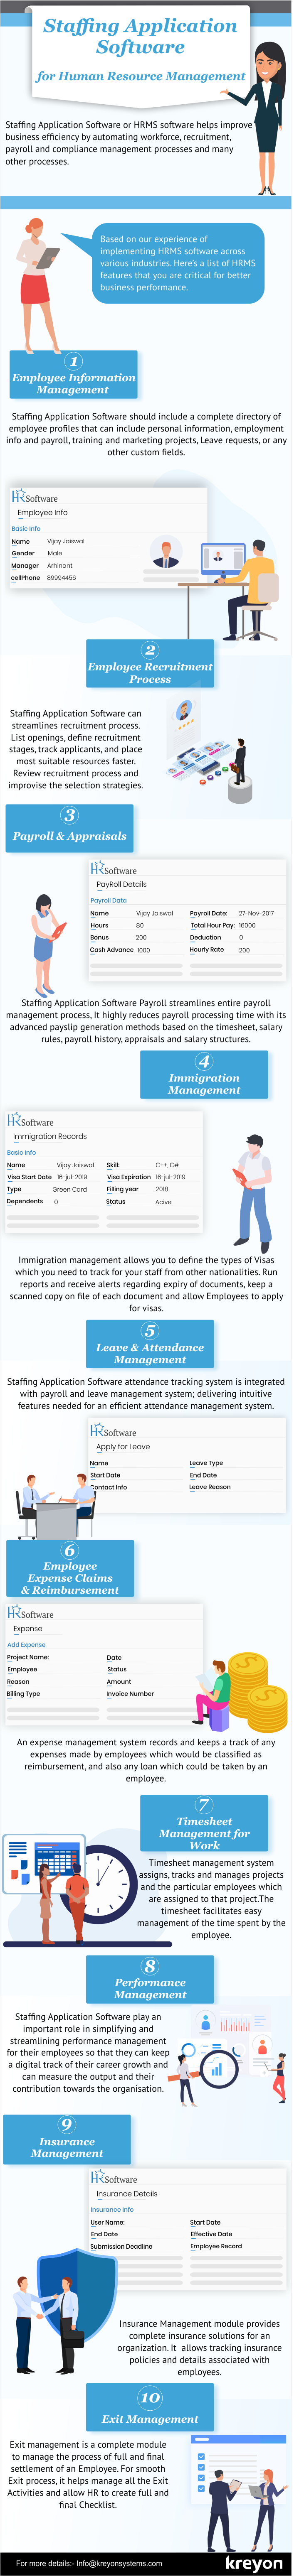 Staffing Application Software 